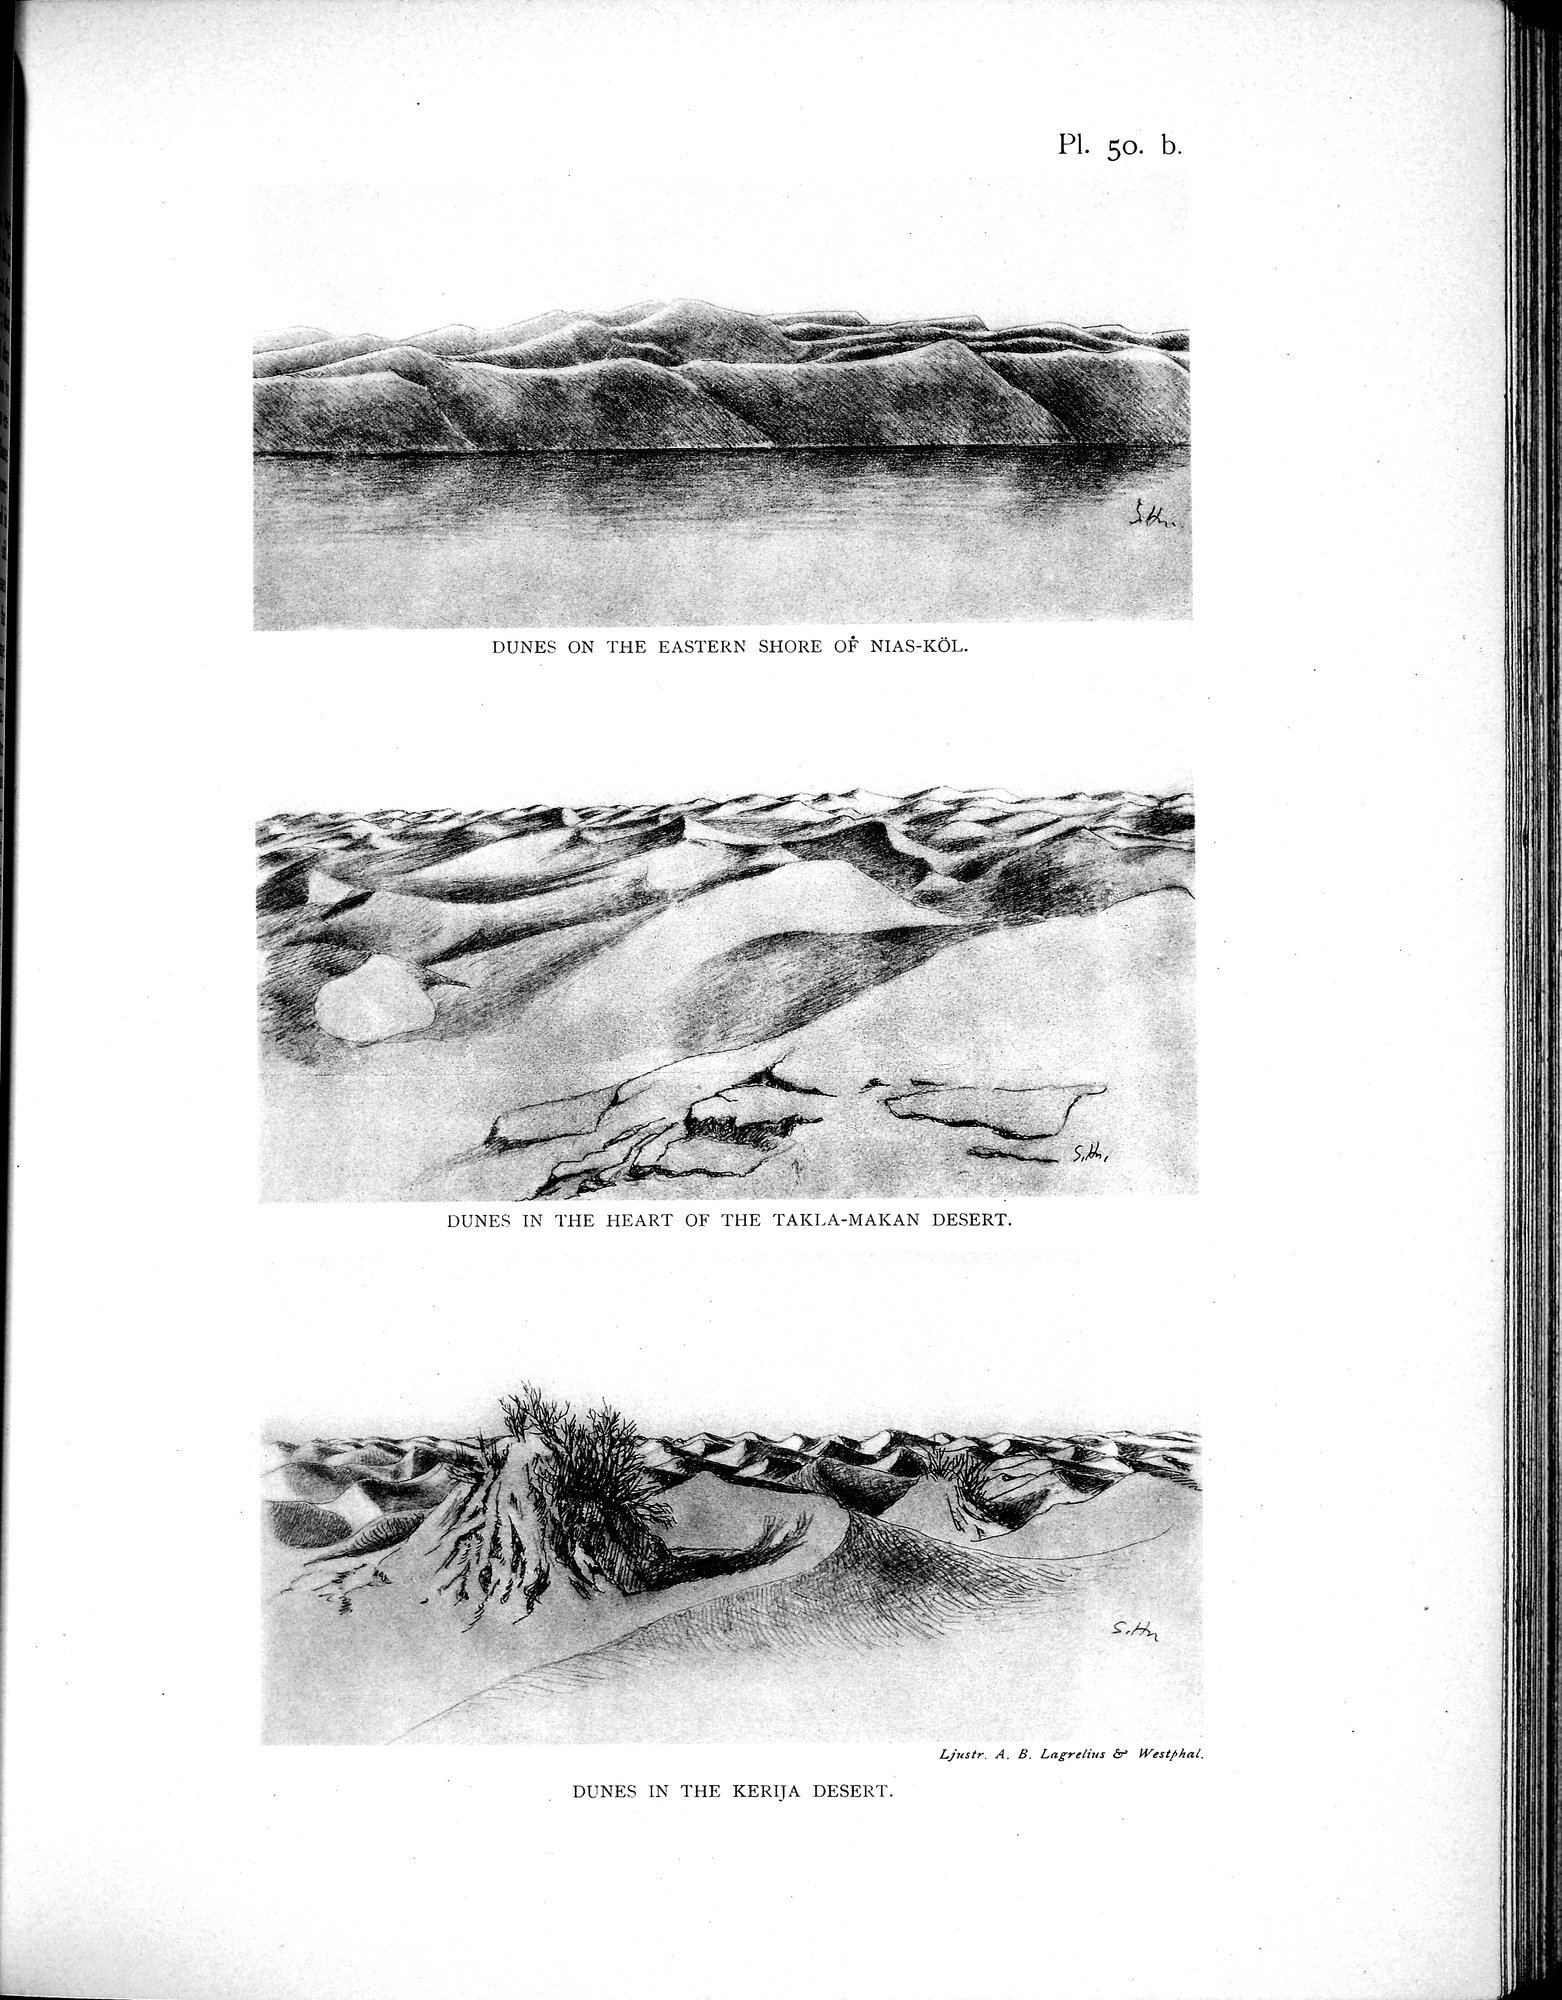 Scientific Results of a Journey in Central Asia, 1899-1902 : vol.2 / 569 ページ（白黒高解像度画像）